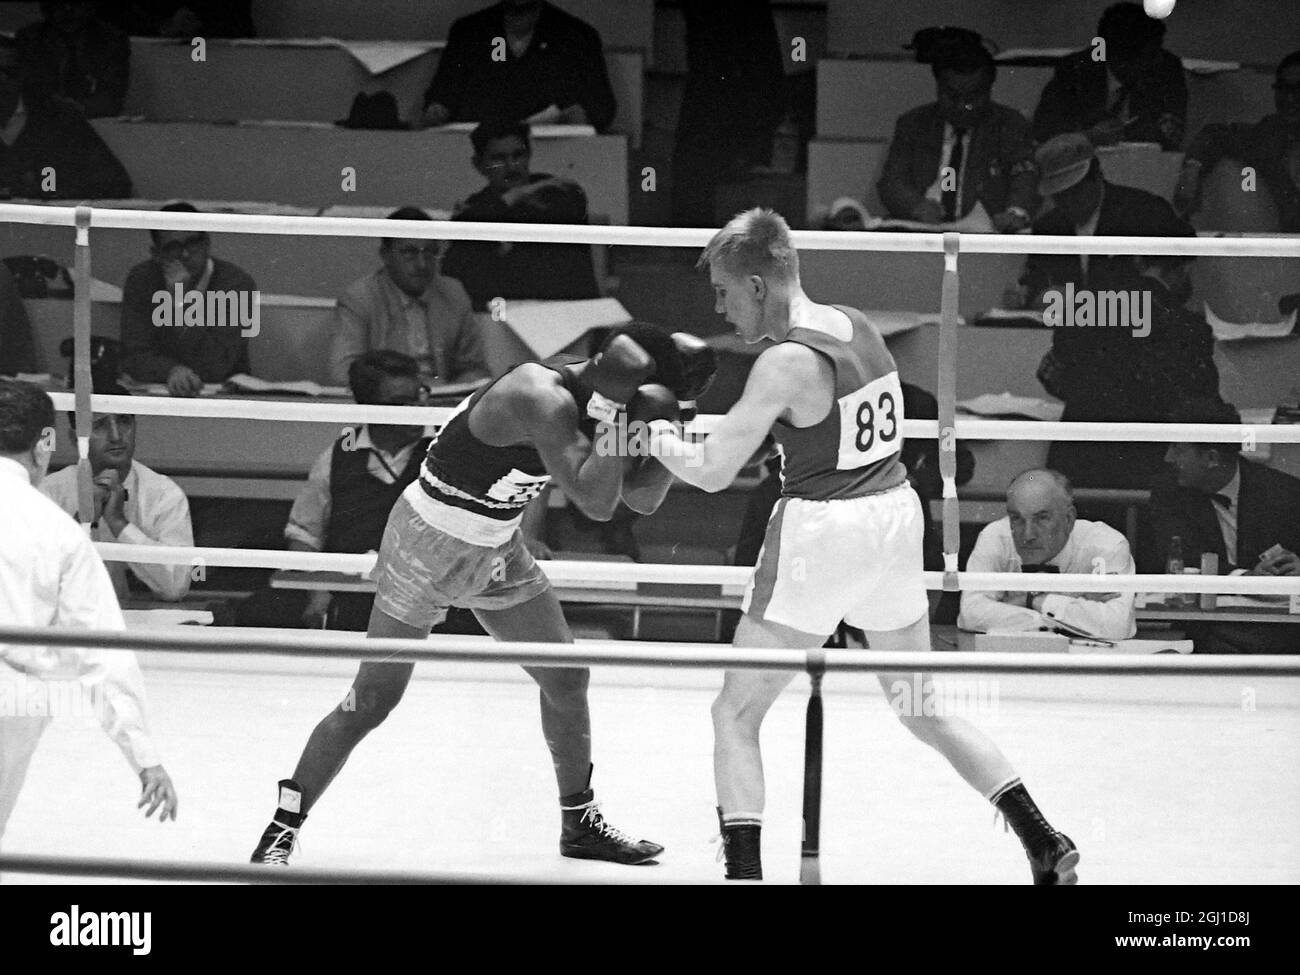 OLYMPICS, OLYMPIC SPORT GAMES - THE XVIII 18TH OLYMPIAD IN TOKYO, JAPAN - BOXING OLYMPICS LIGHT MIDDLE ALEMOU V MATTSSON  ;  15 OCTOBER 1964 Stock Photo